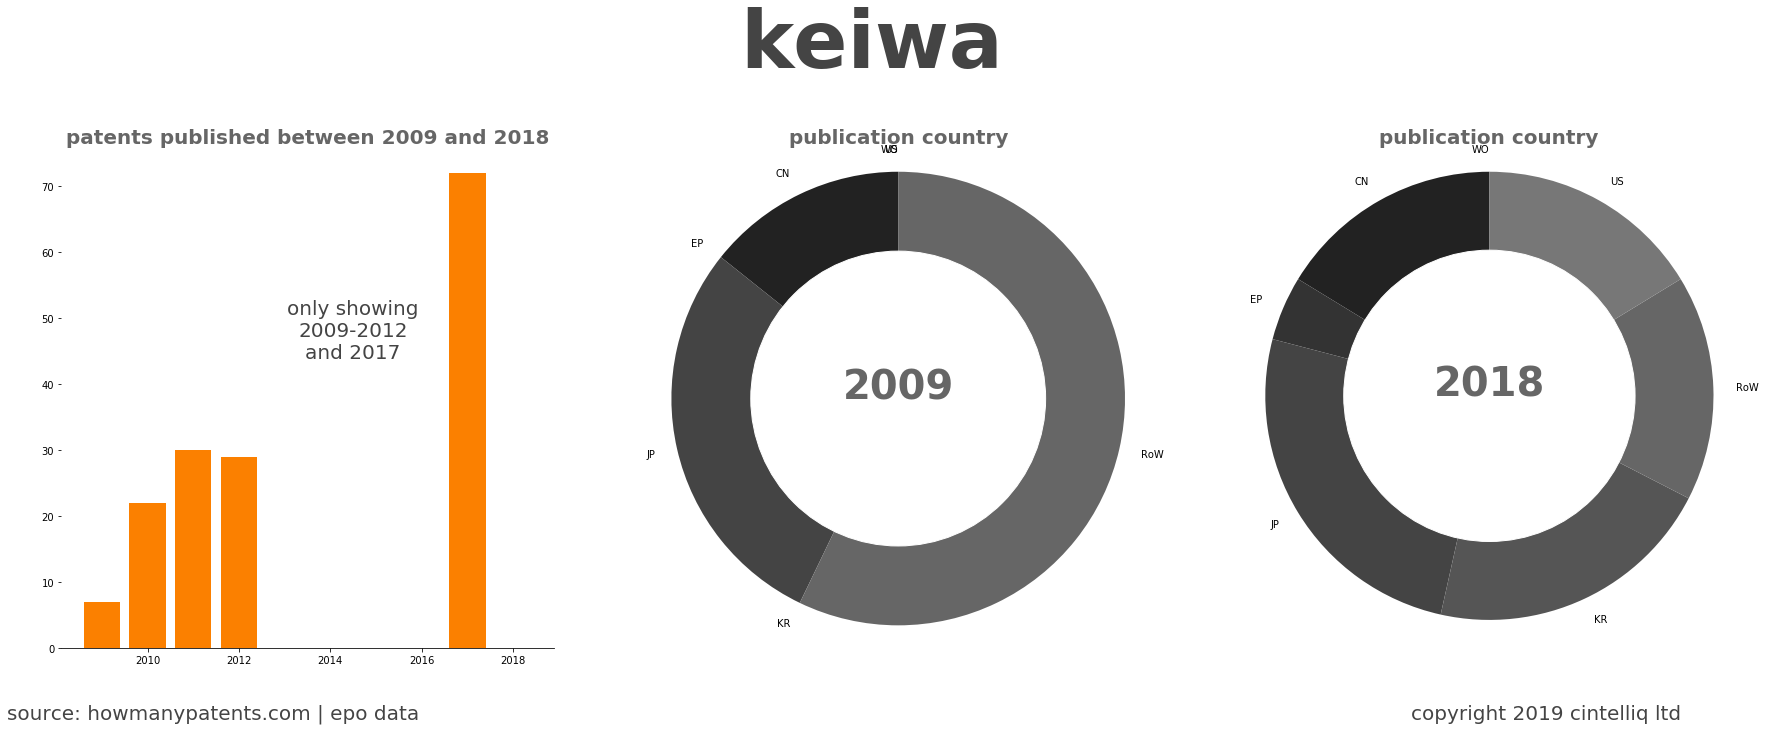 summary of patents for Keiwa